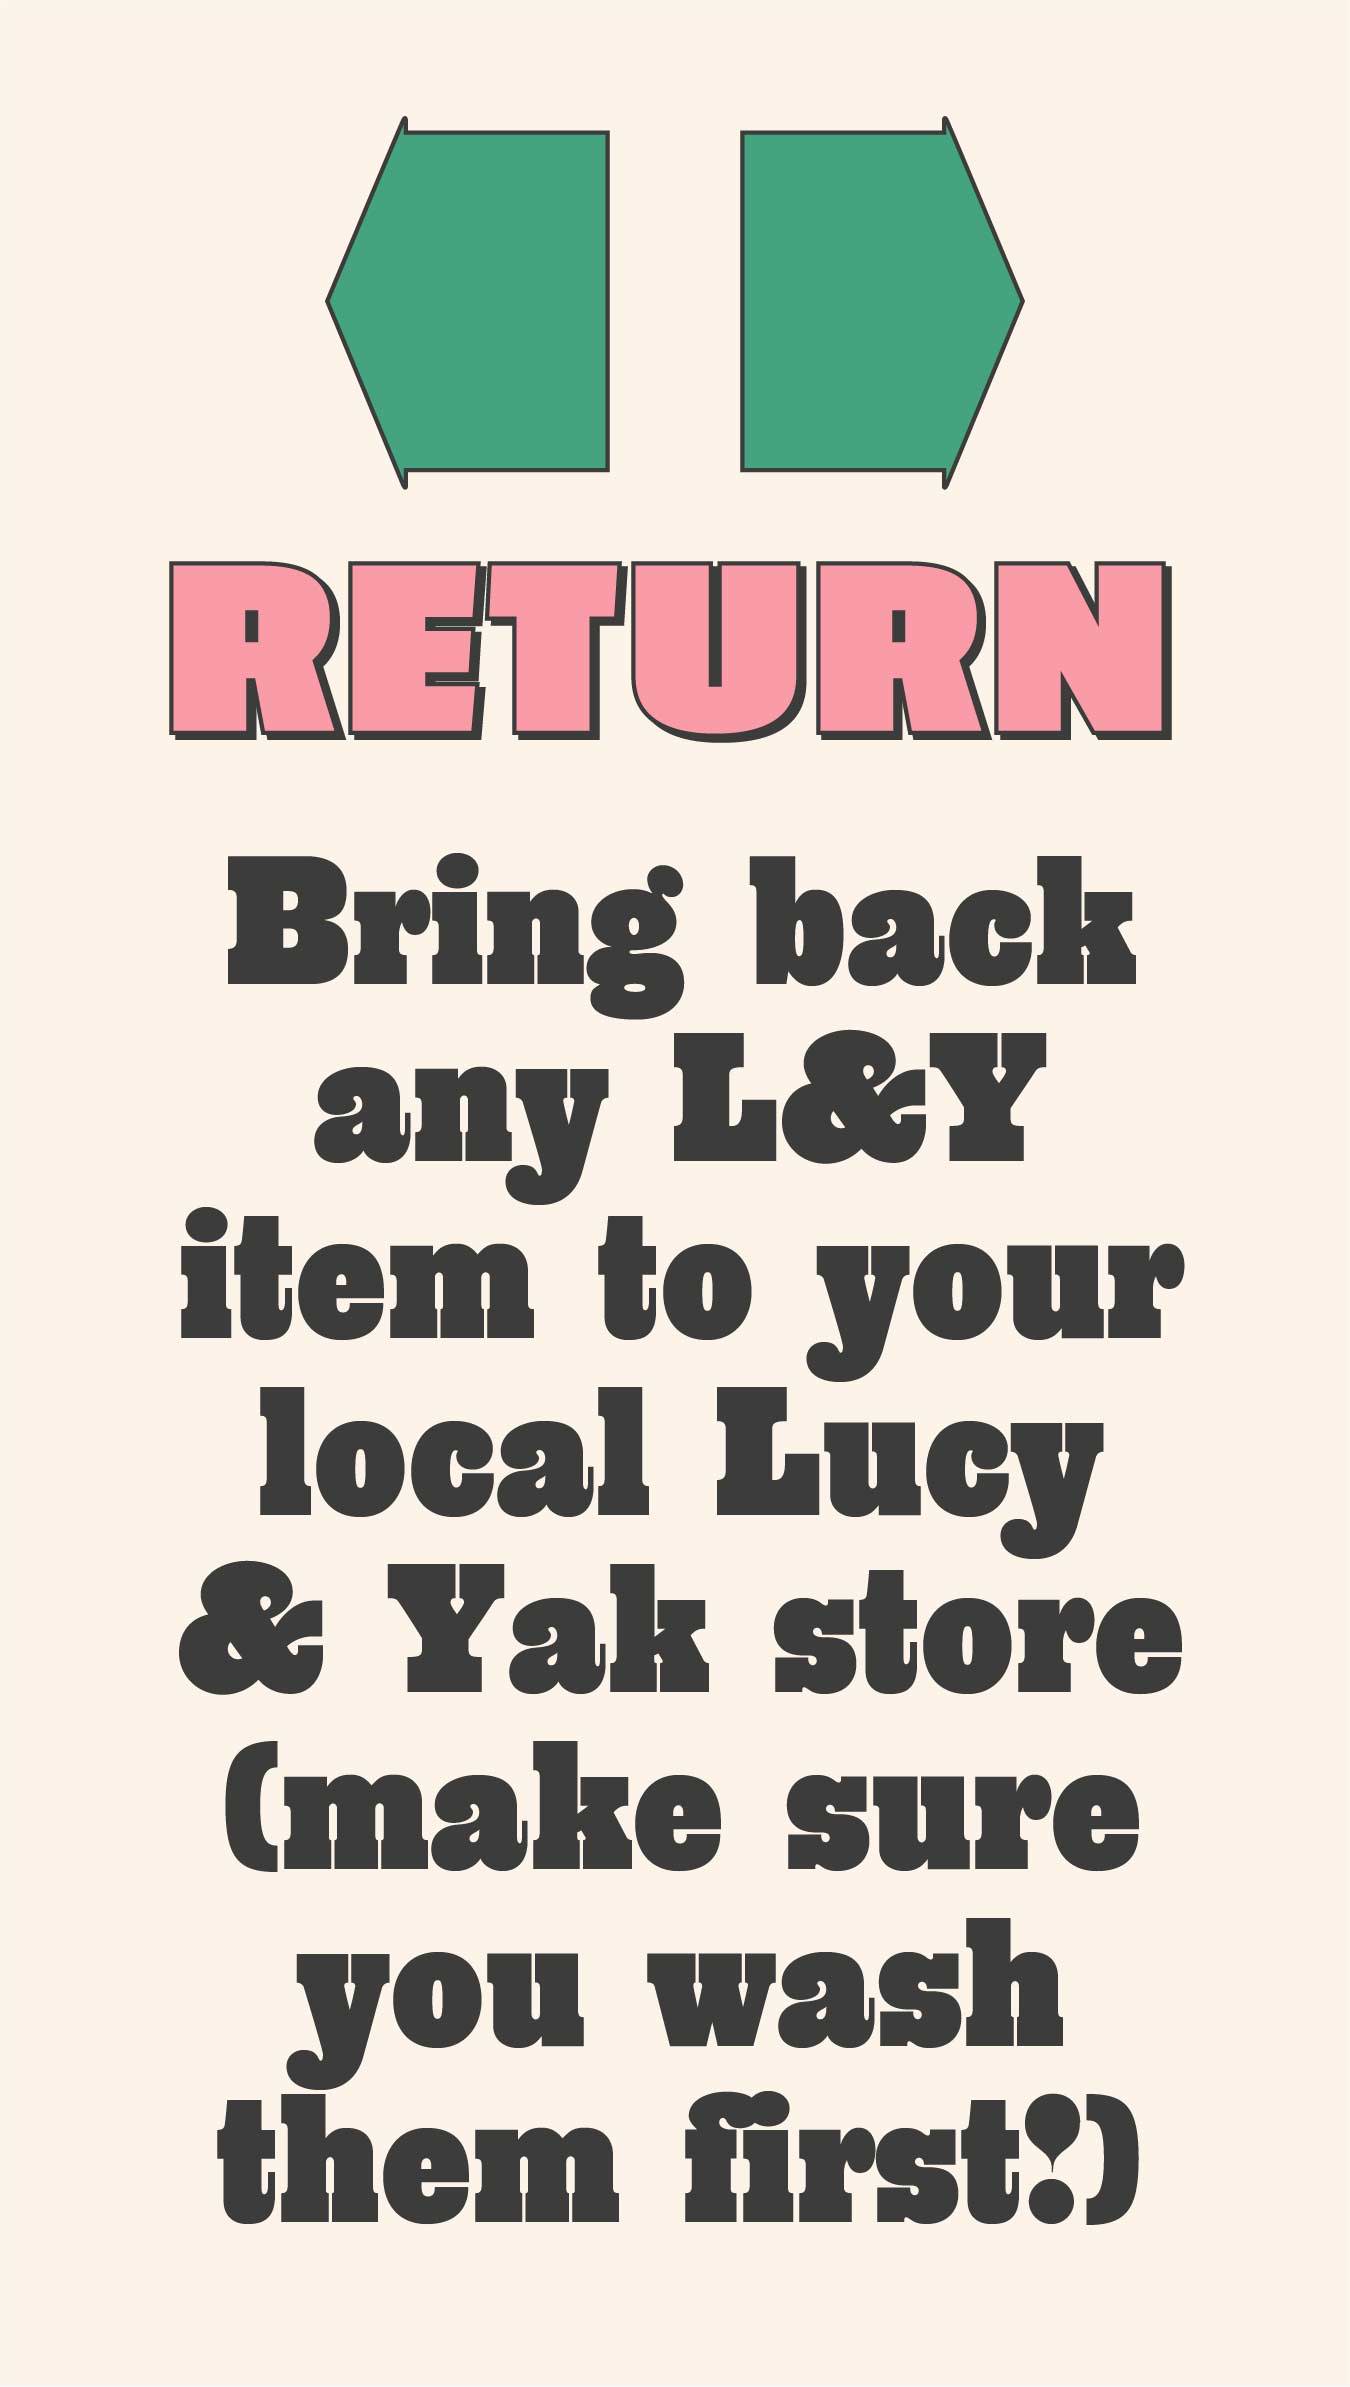 Return: Bring back any Lucy & Yak item to your local Lucy & Yak shop (make sure you wash them first!).